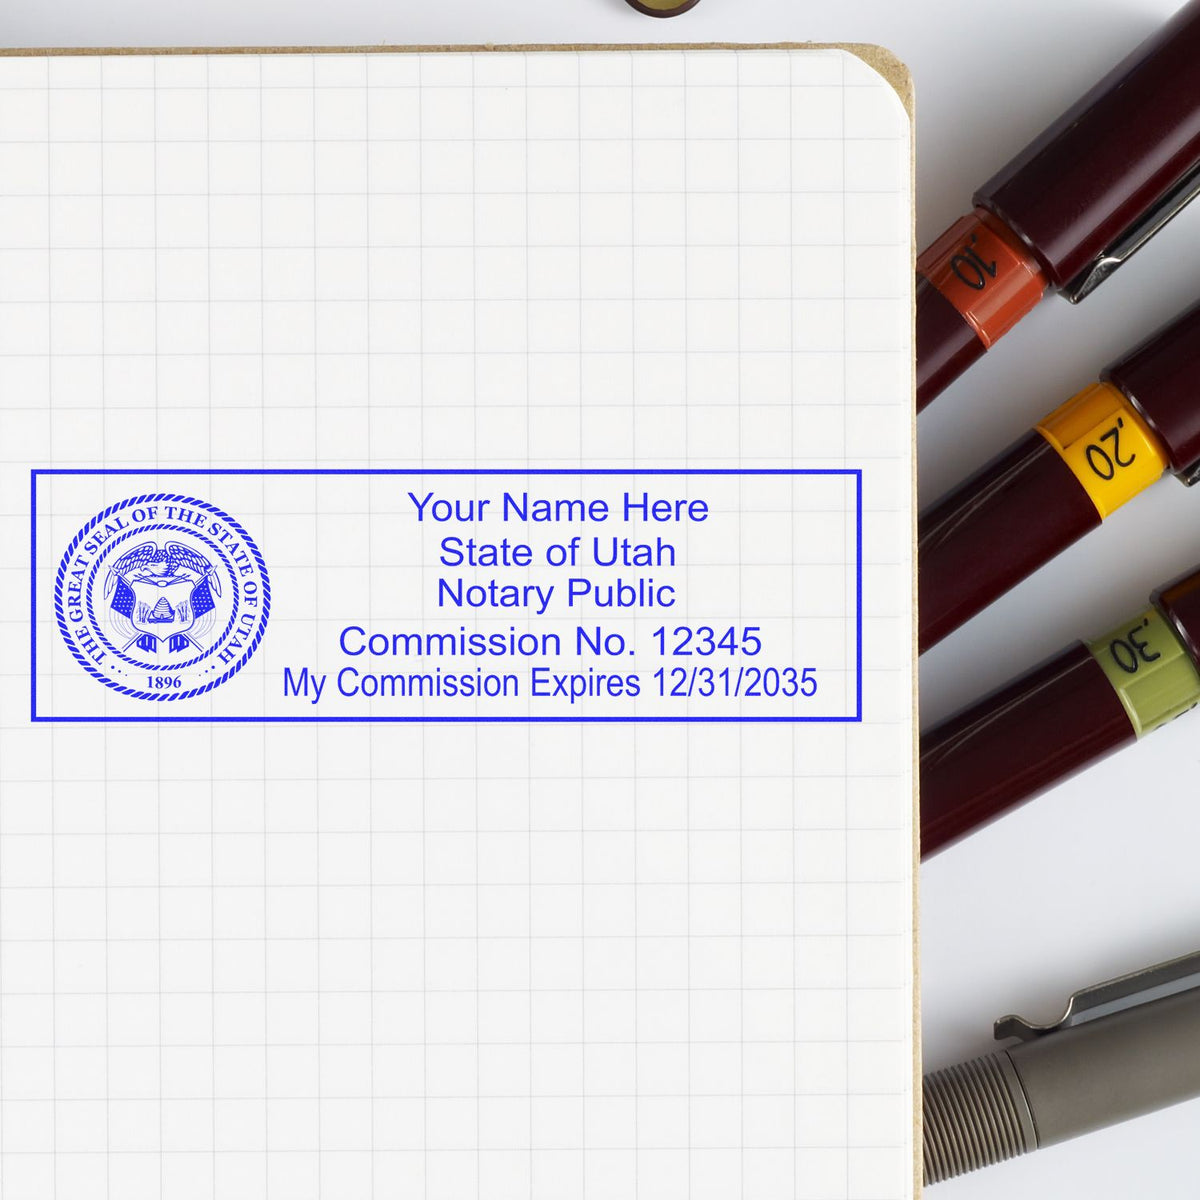 The MaxLight Premium Pre-Inked Utah State Seal Notarial Stamp stamp impression comes to life with a crisp, detailed photo on paper - showcasing true professional quality.